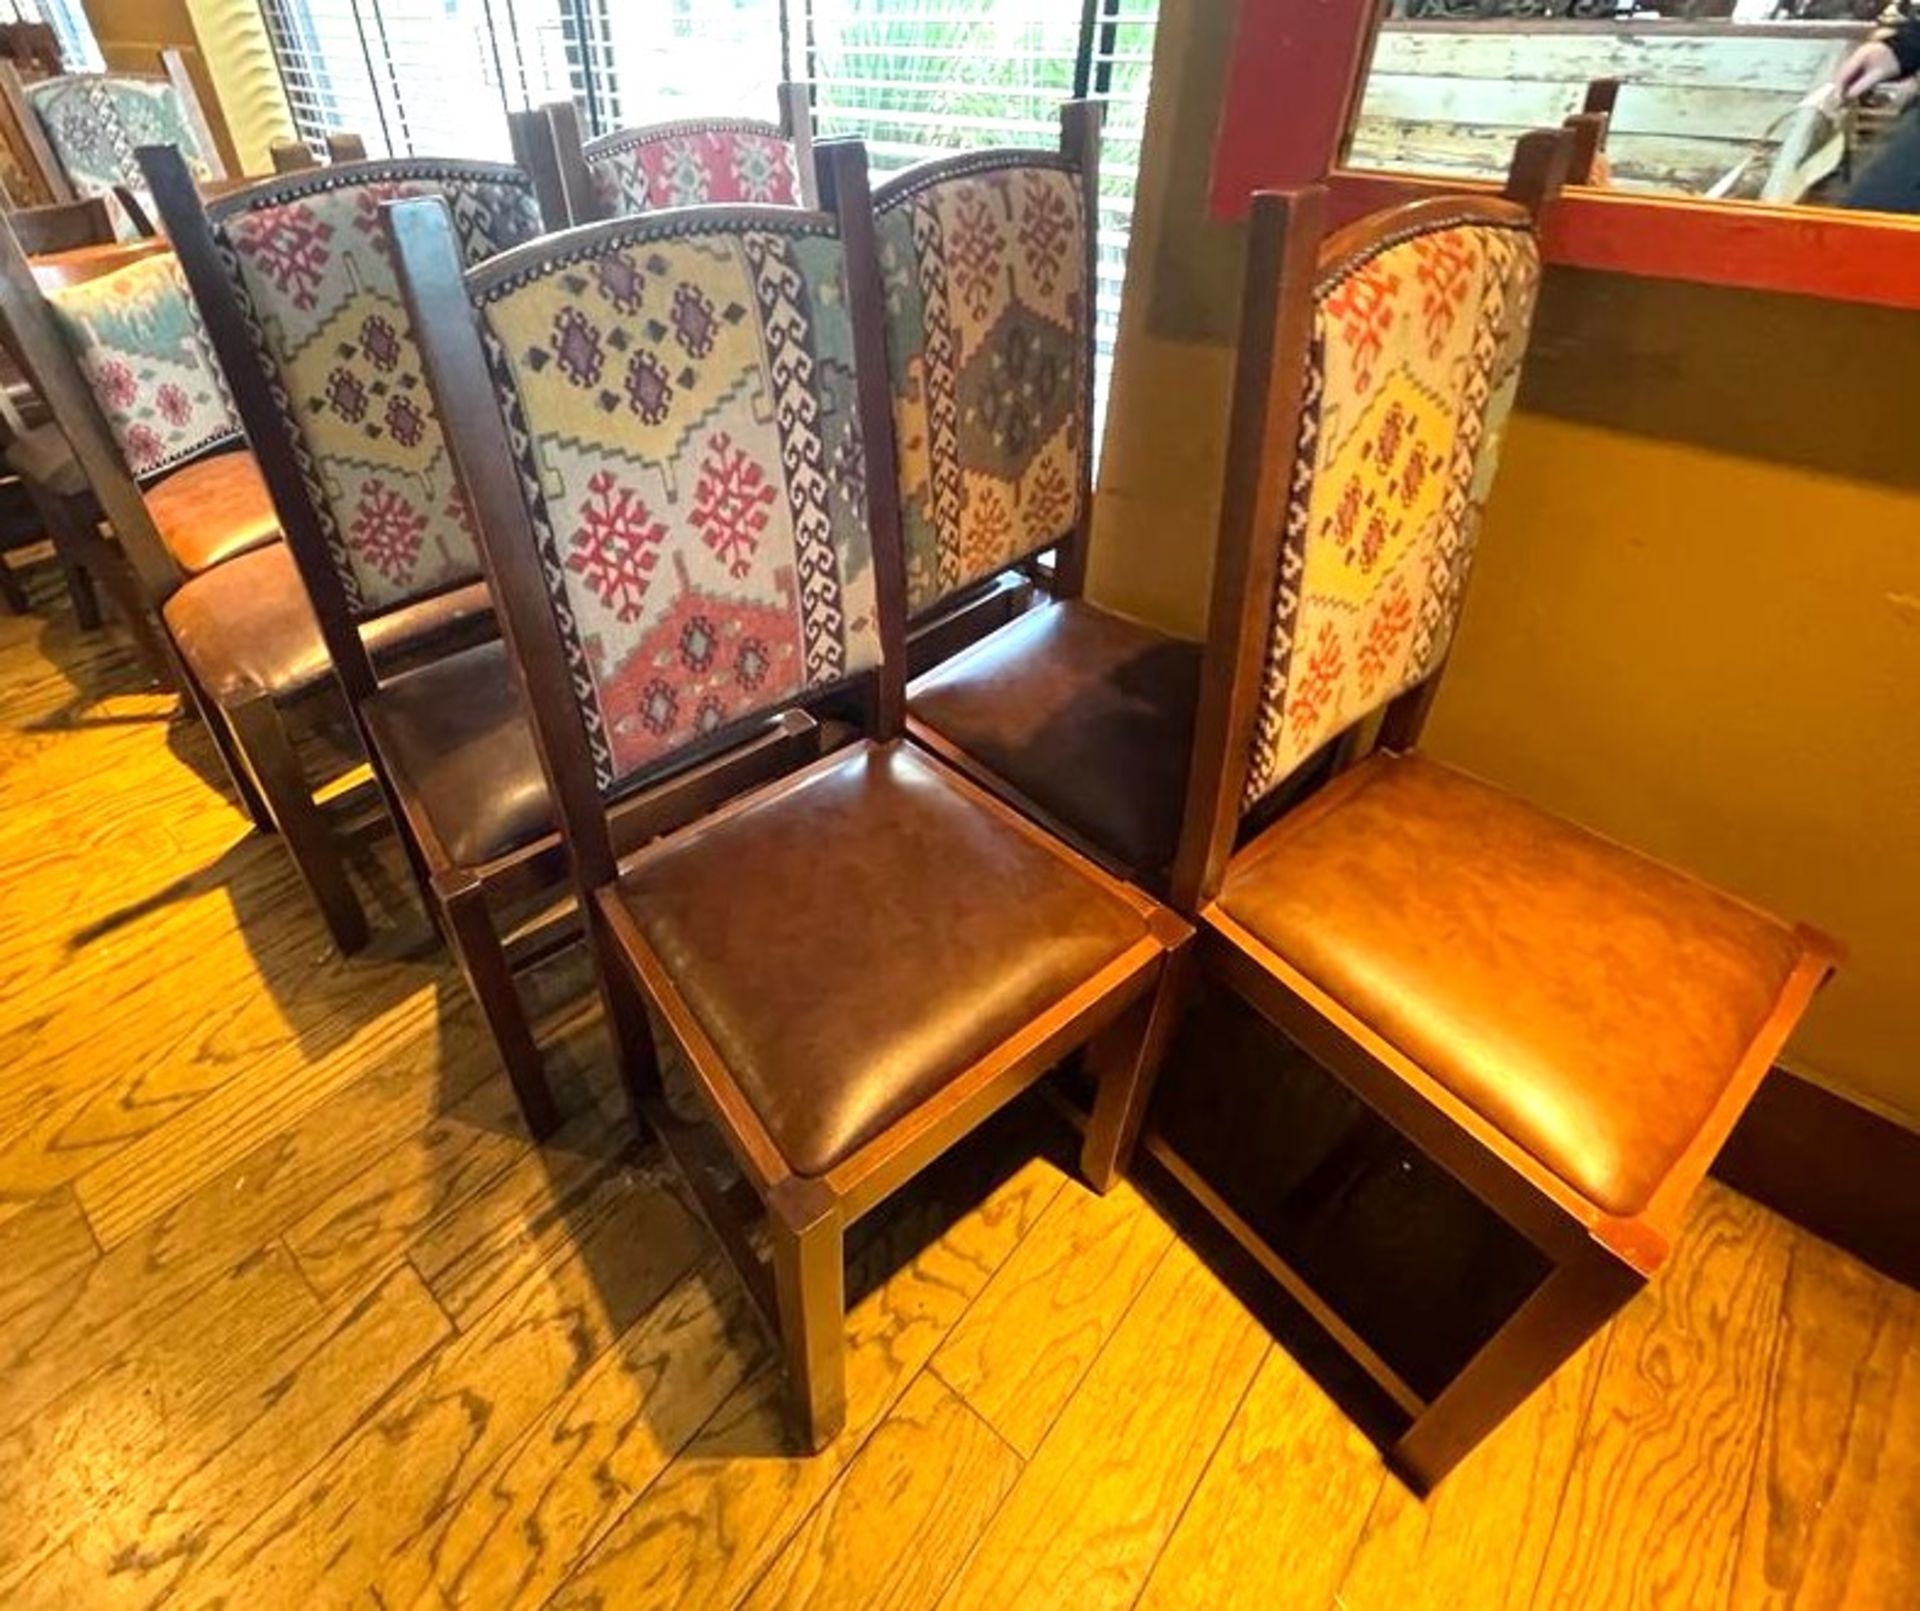 15 x High Back Dining Chairs From a Mexican Themed Restaurant - Features Wooden Frames, Brown Seat - Image 2 of 9